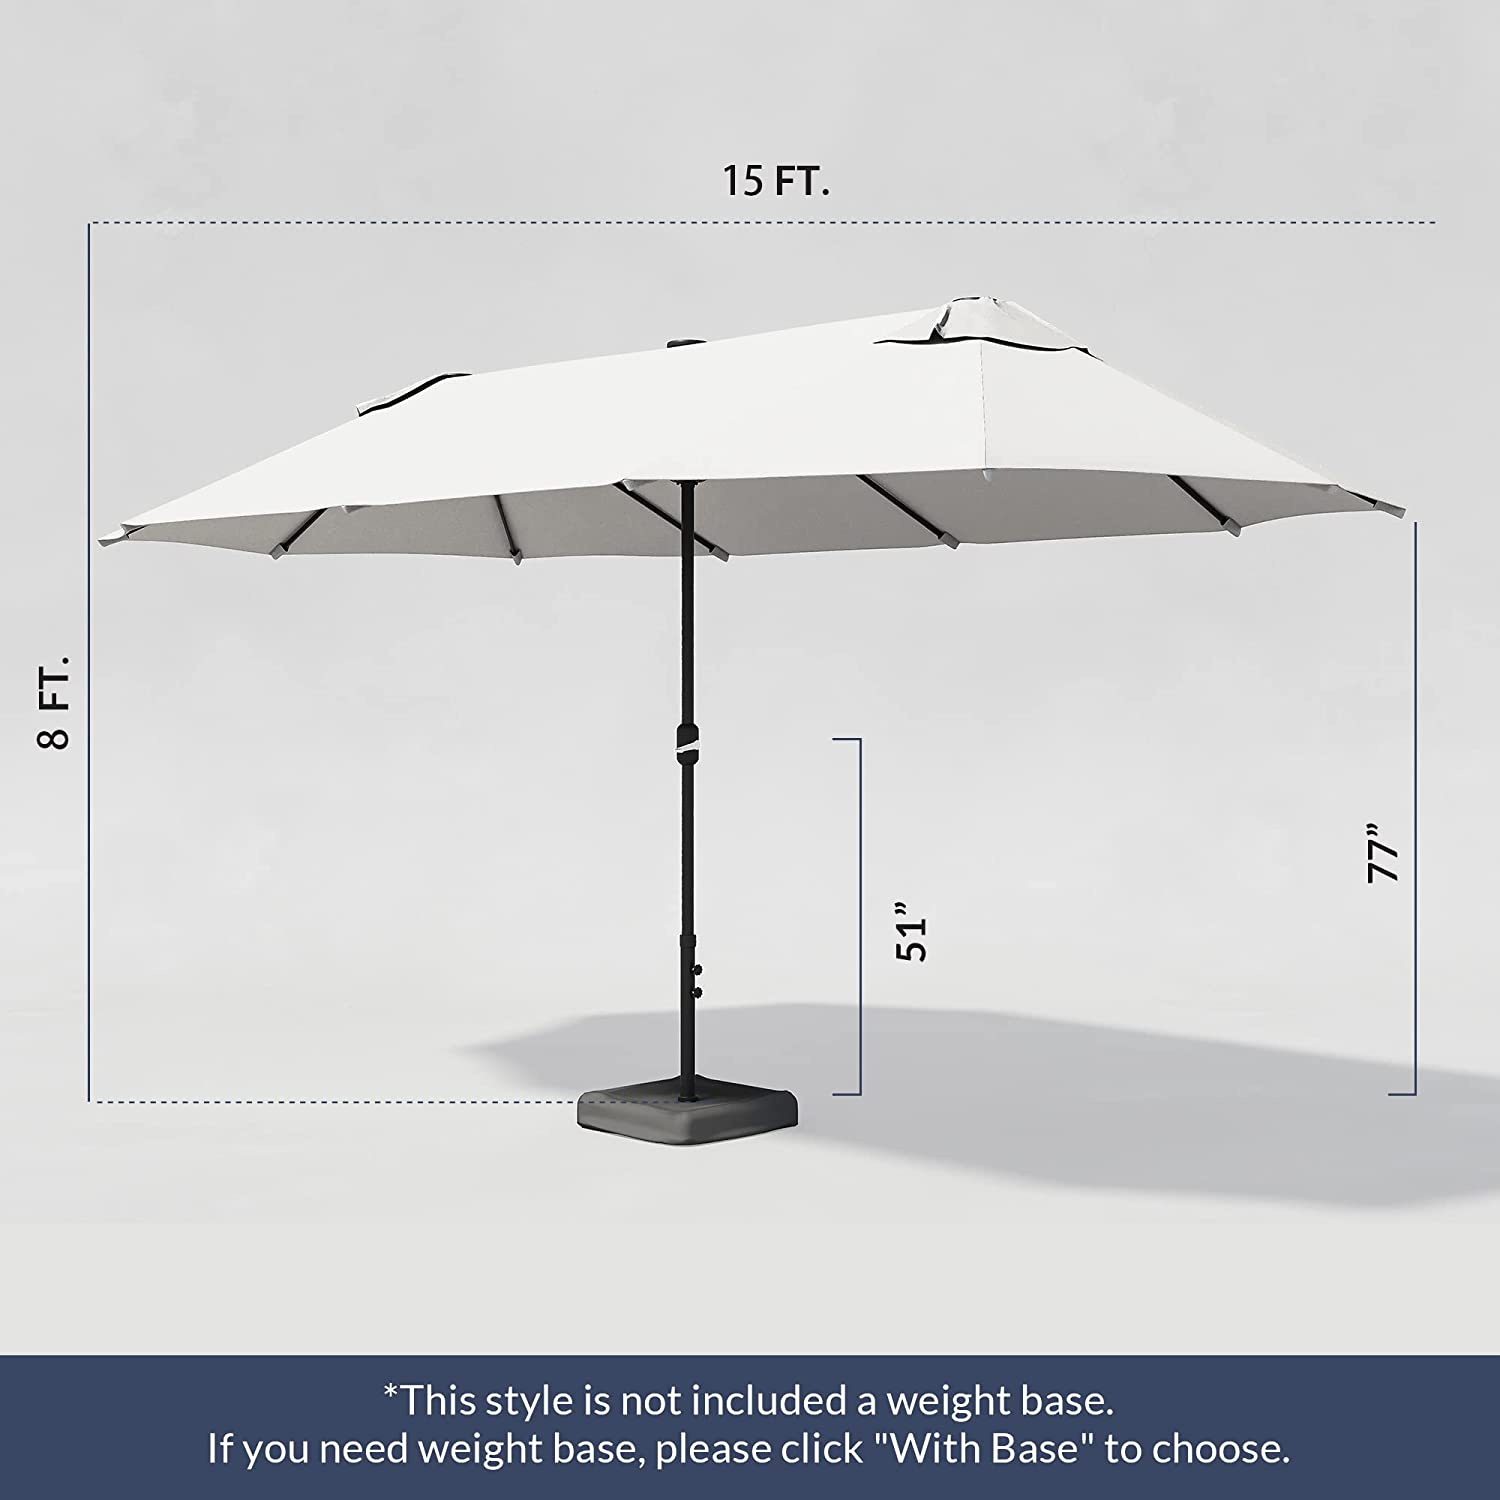 Belleze 15 ft Extra Large Outdoor Market Patio Umbrella Double-Sided Design with Crank, Cream, Size: Without Base, Red